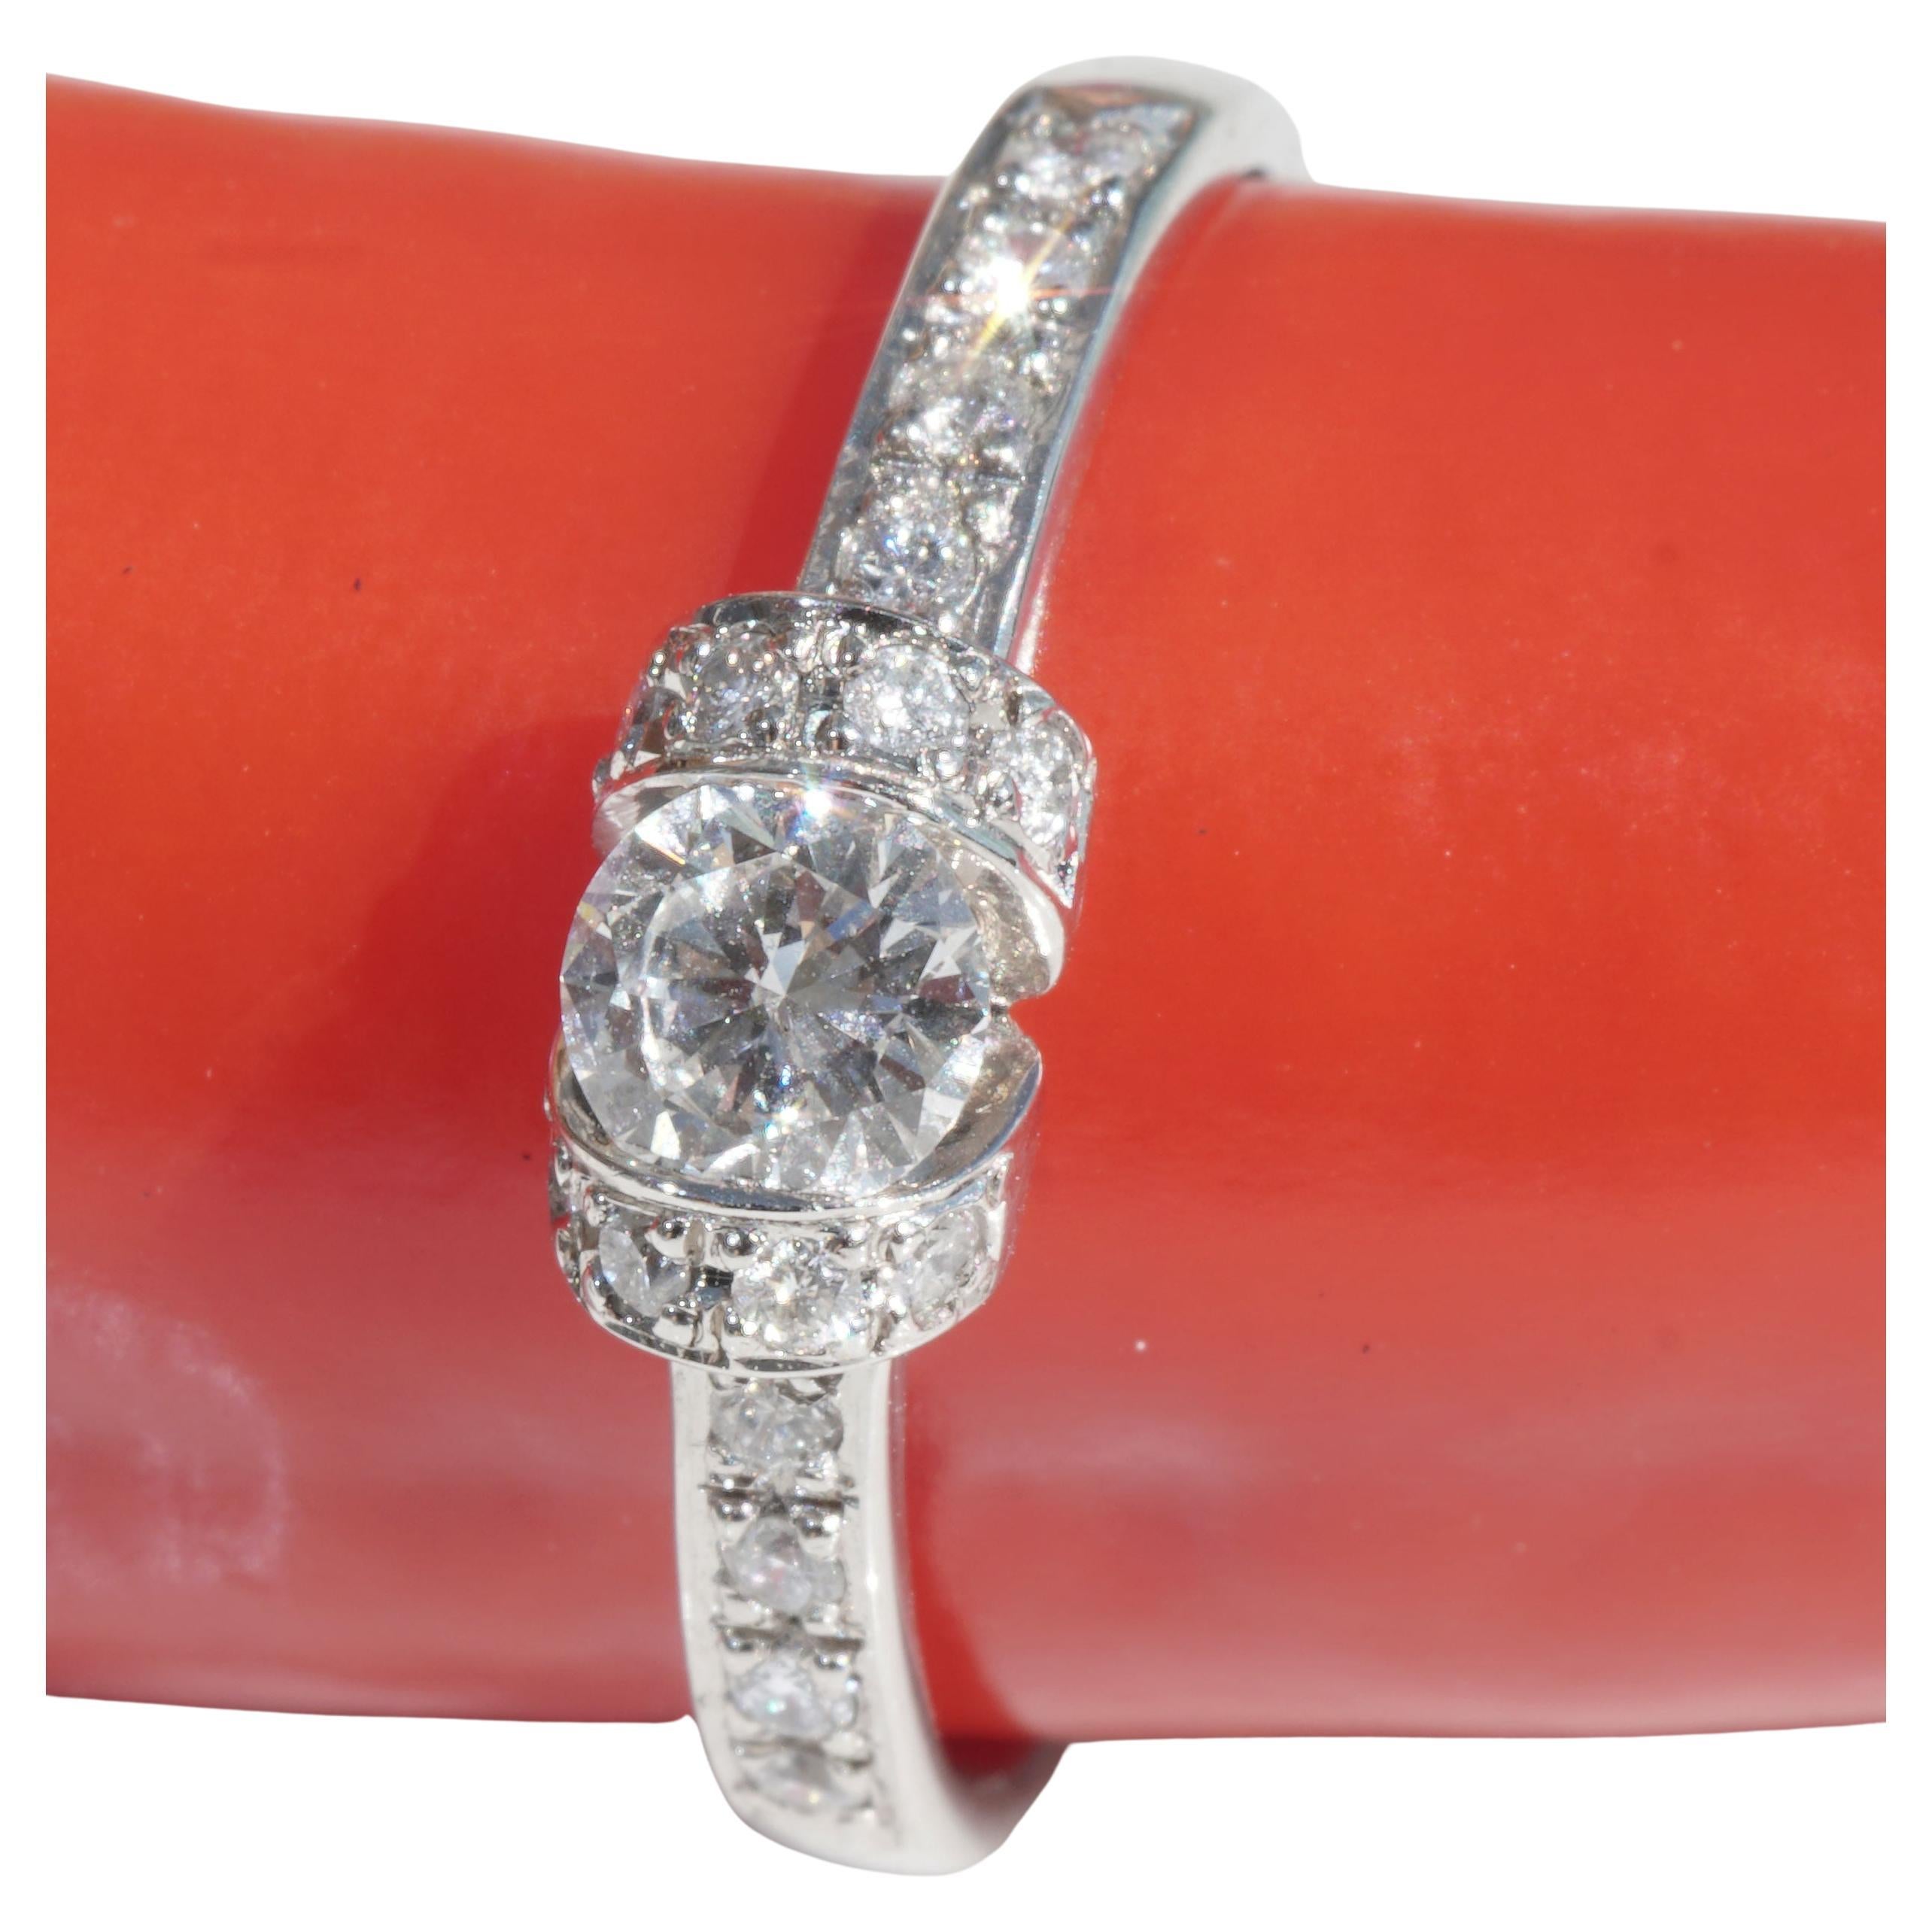 this great platinum ring is very noble worked, a full cut brilliant of about 0.337 ct / 4.6 mm diameter TW (fine white G) / SI (small inclusions) great brilliance and in the ring shoulders pavee set full cut diamonds total about 0.18 ct, TW (fine